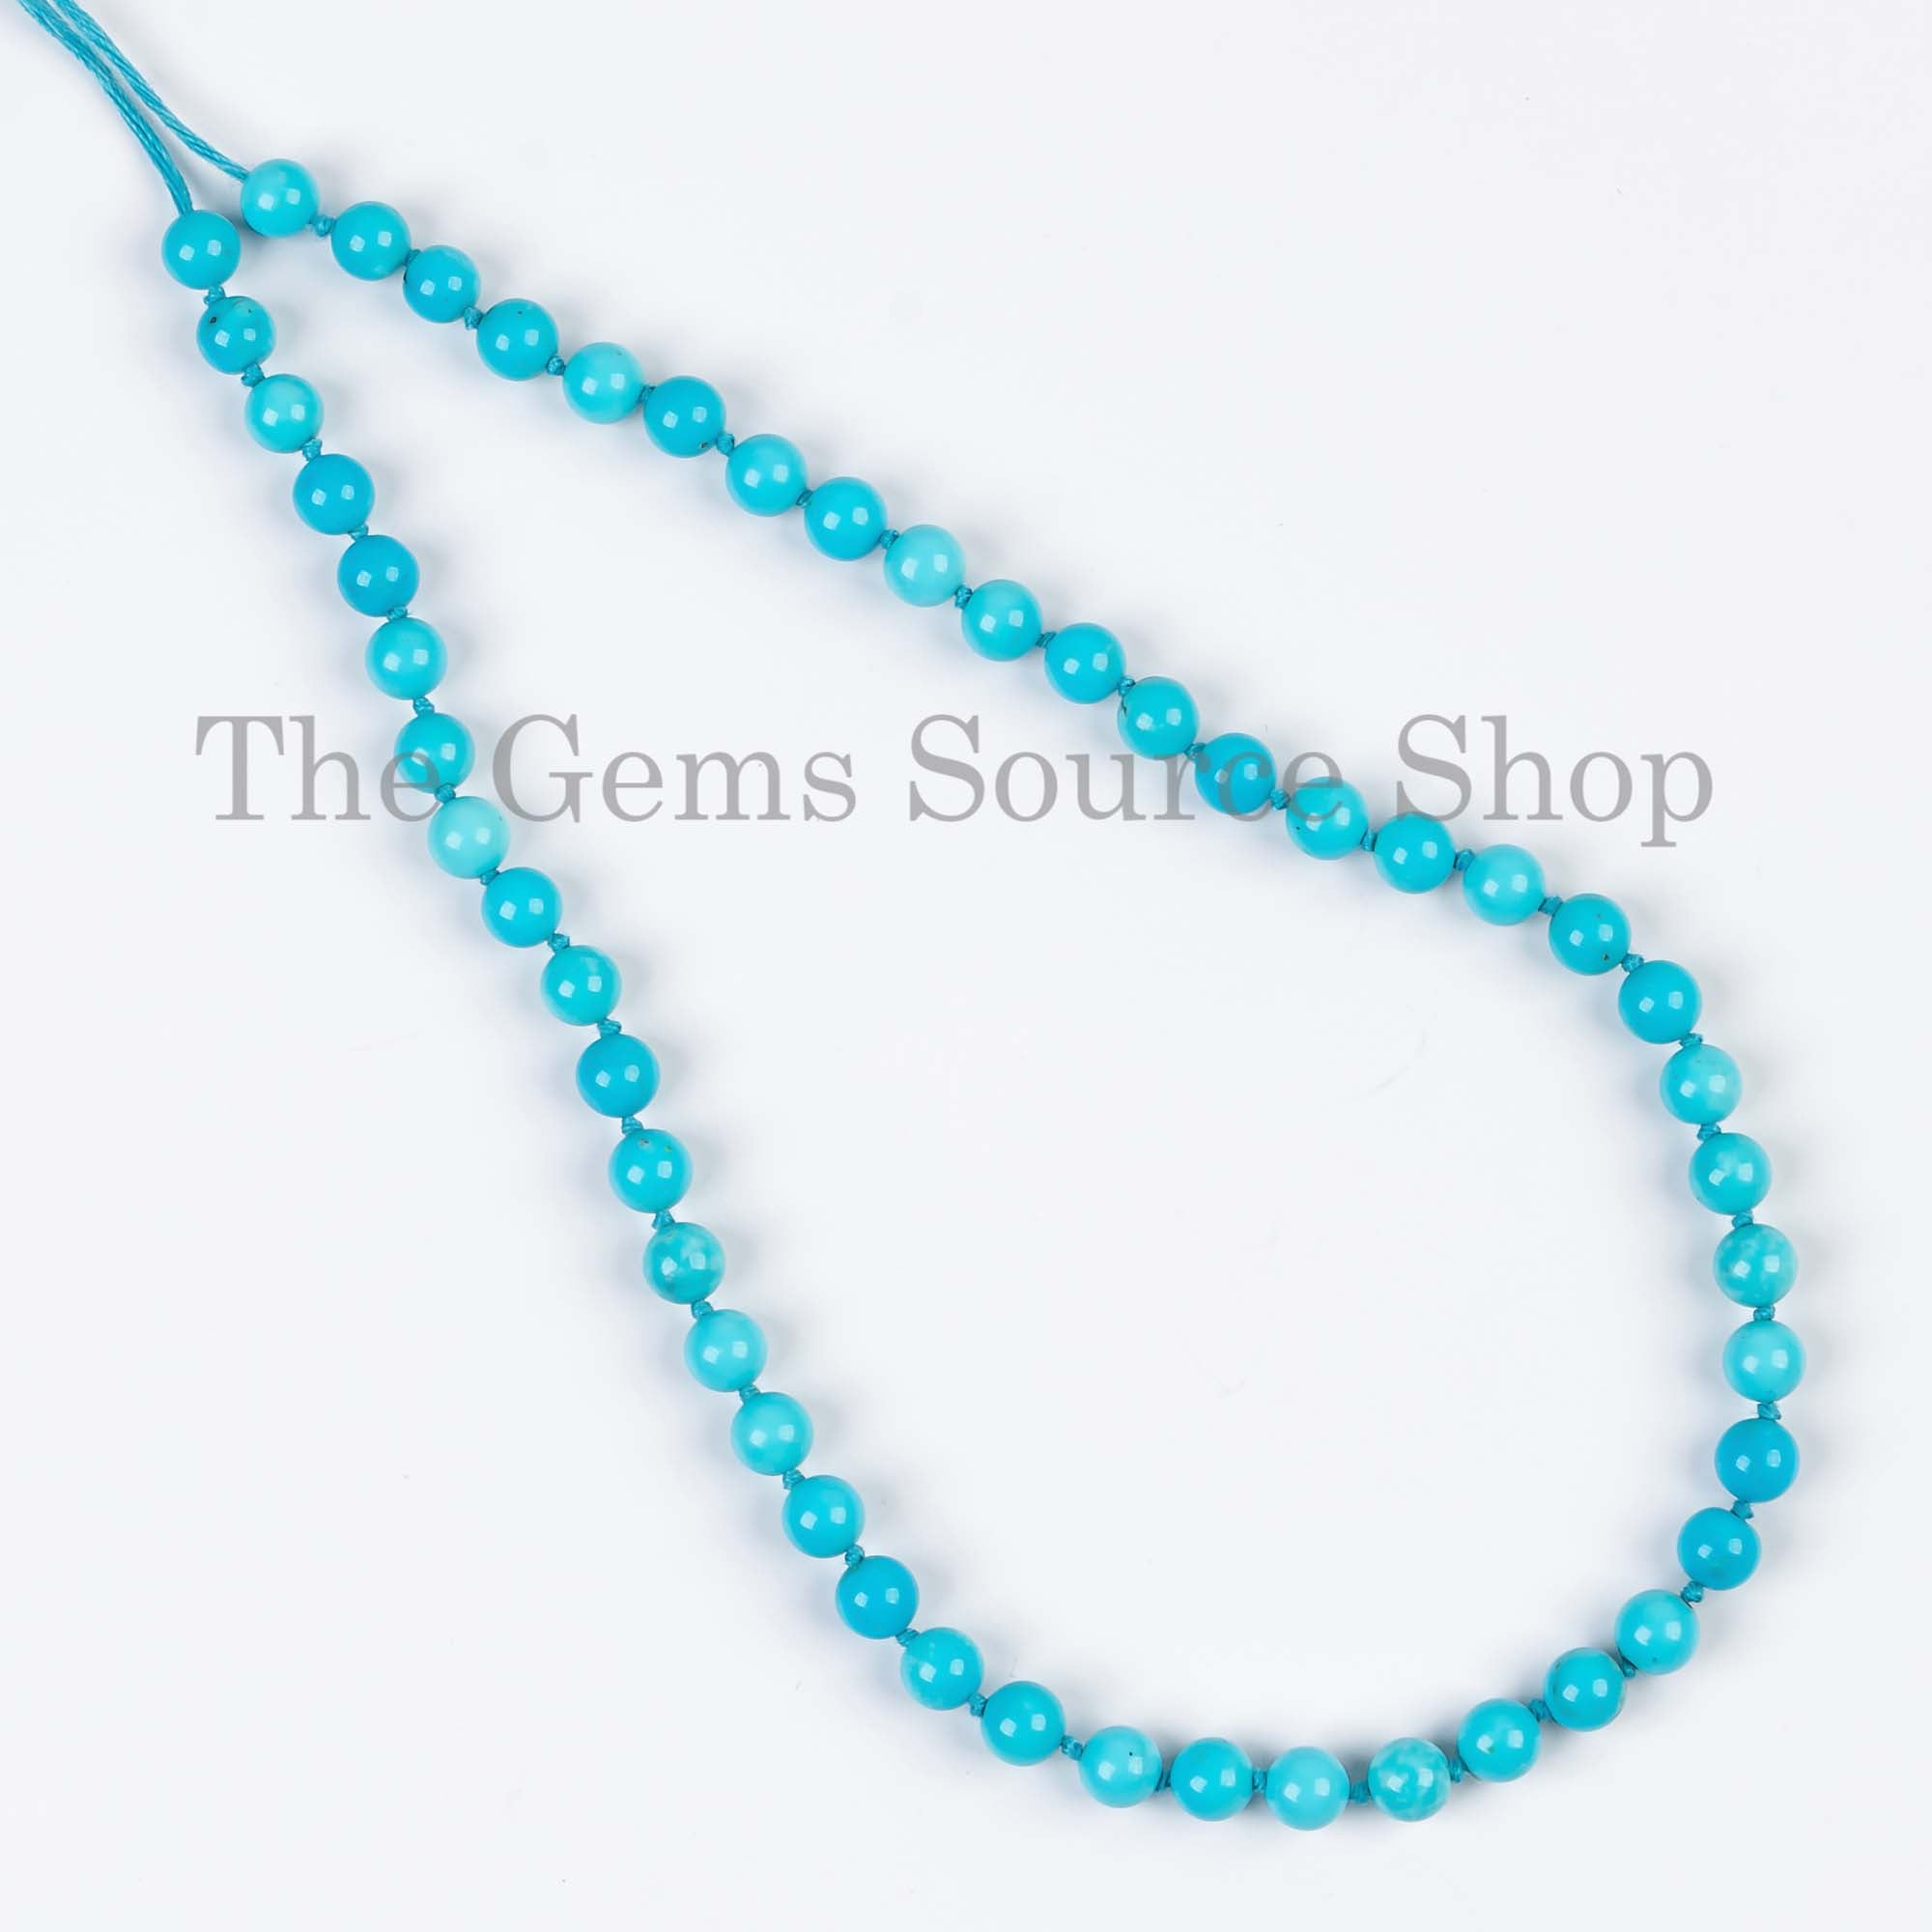 Turquoise Smooth Round Beads, AAA Quality Turquoise Round Beads, Plain Turquoise Beads